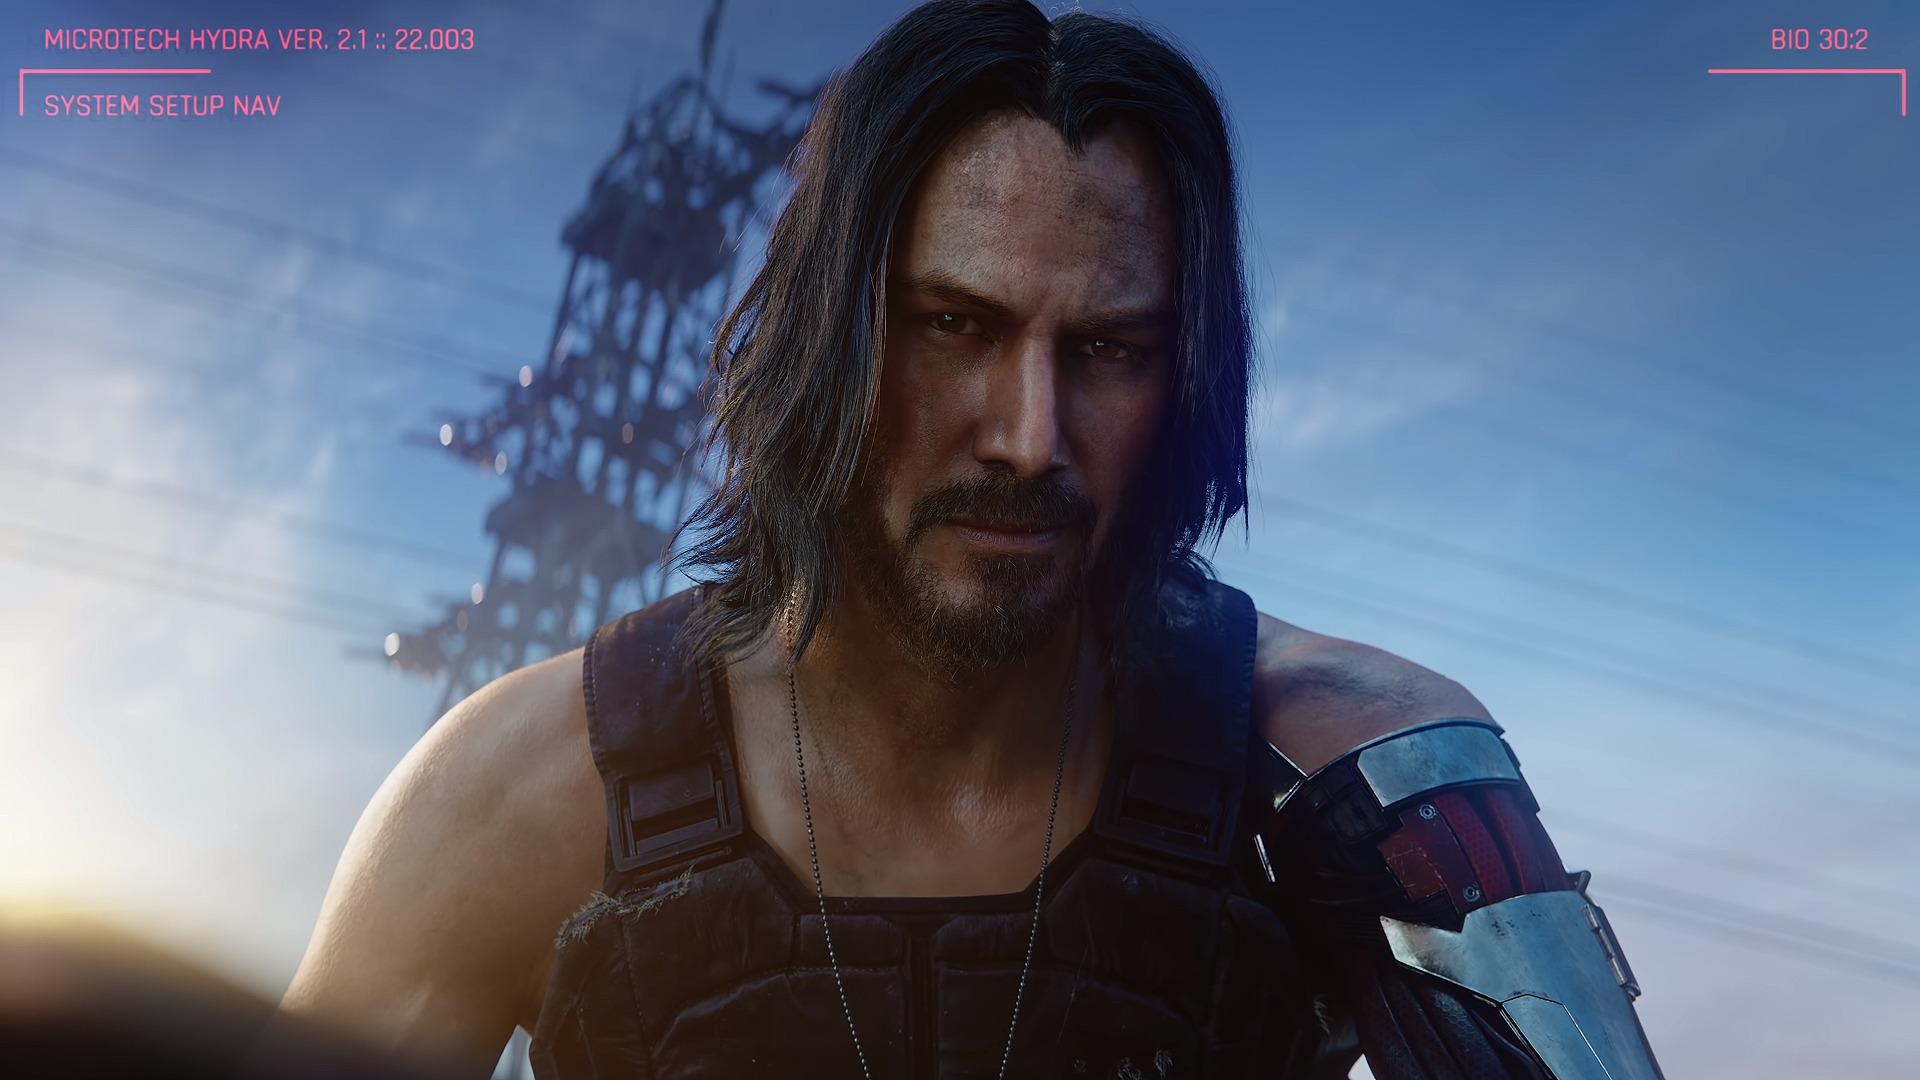 General 1920x1080 Keanu Reeves E3event core2team video games beard men PC gaming CD Projekt RED Cyberpunk 2077 Johnny Silverhand video game men video game characters looking at viewer